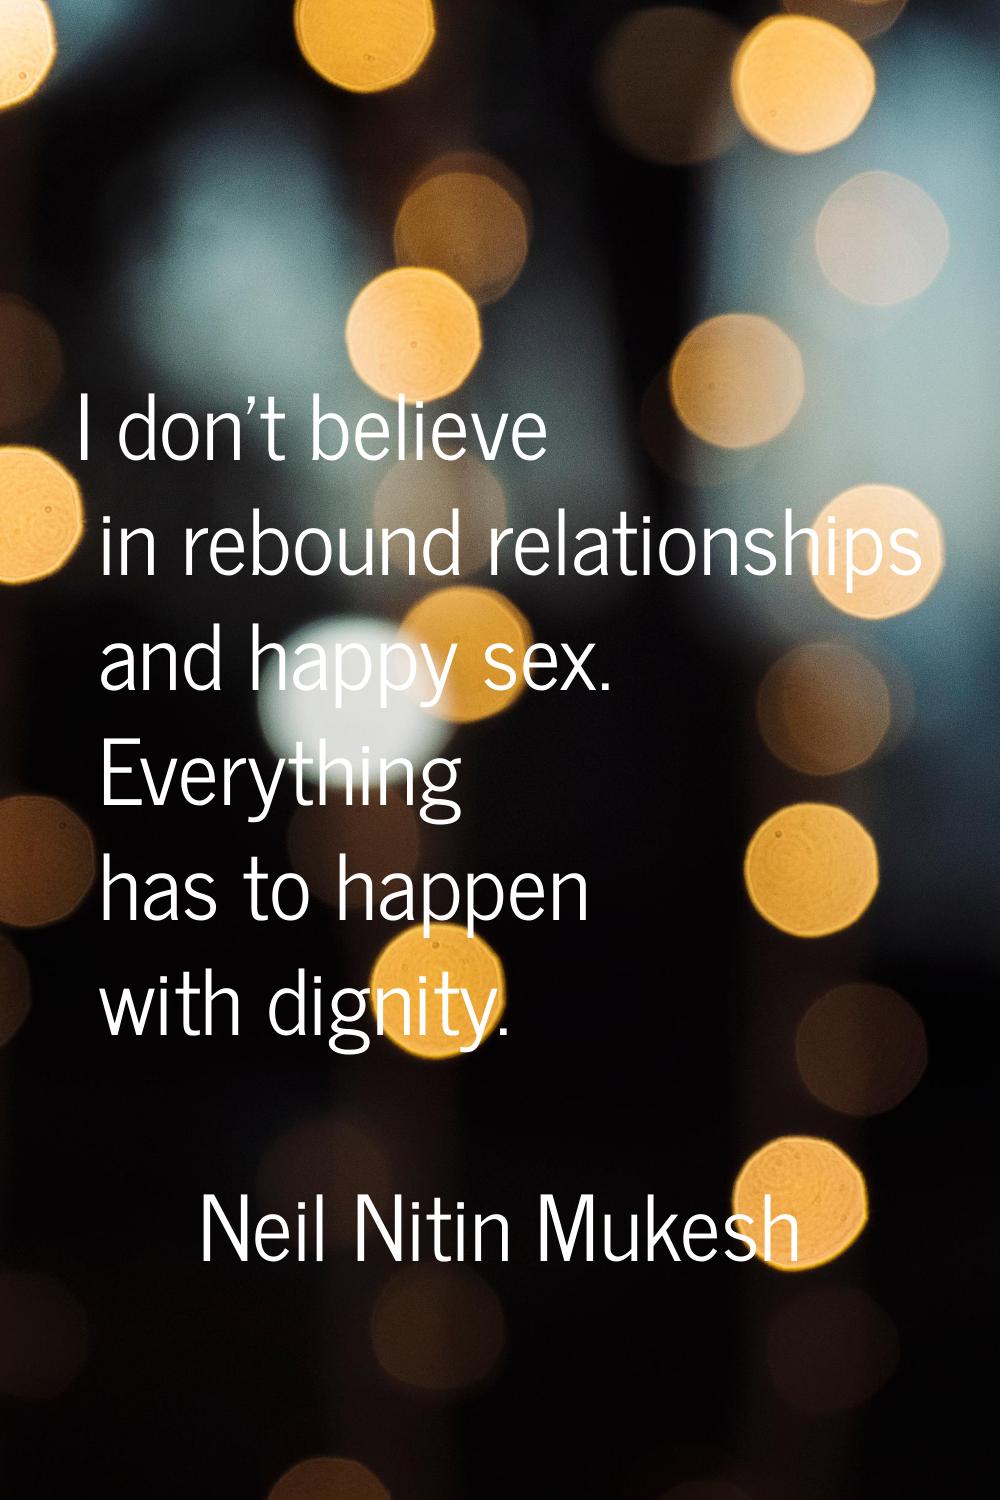 I don't believe in rebound relationships and happy sex. Everything has to happen with dignity.